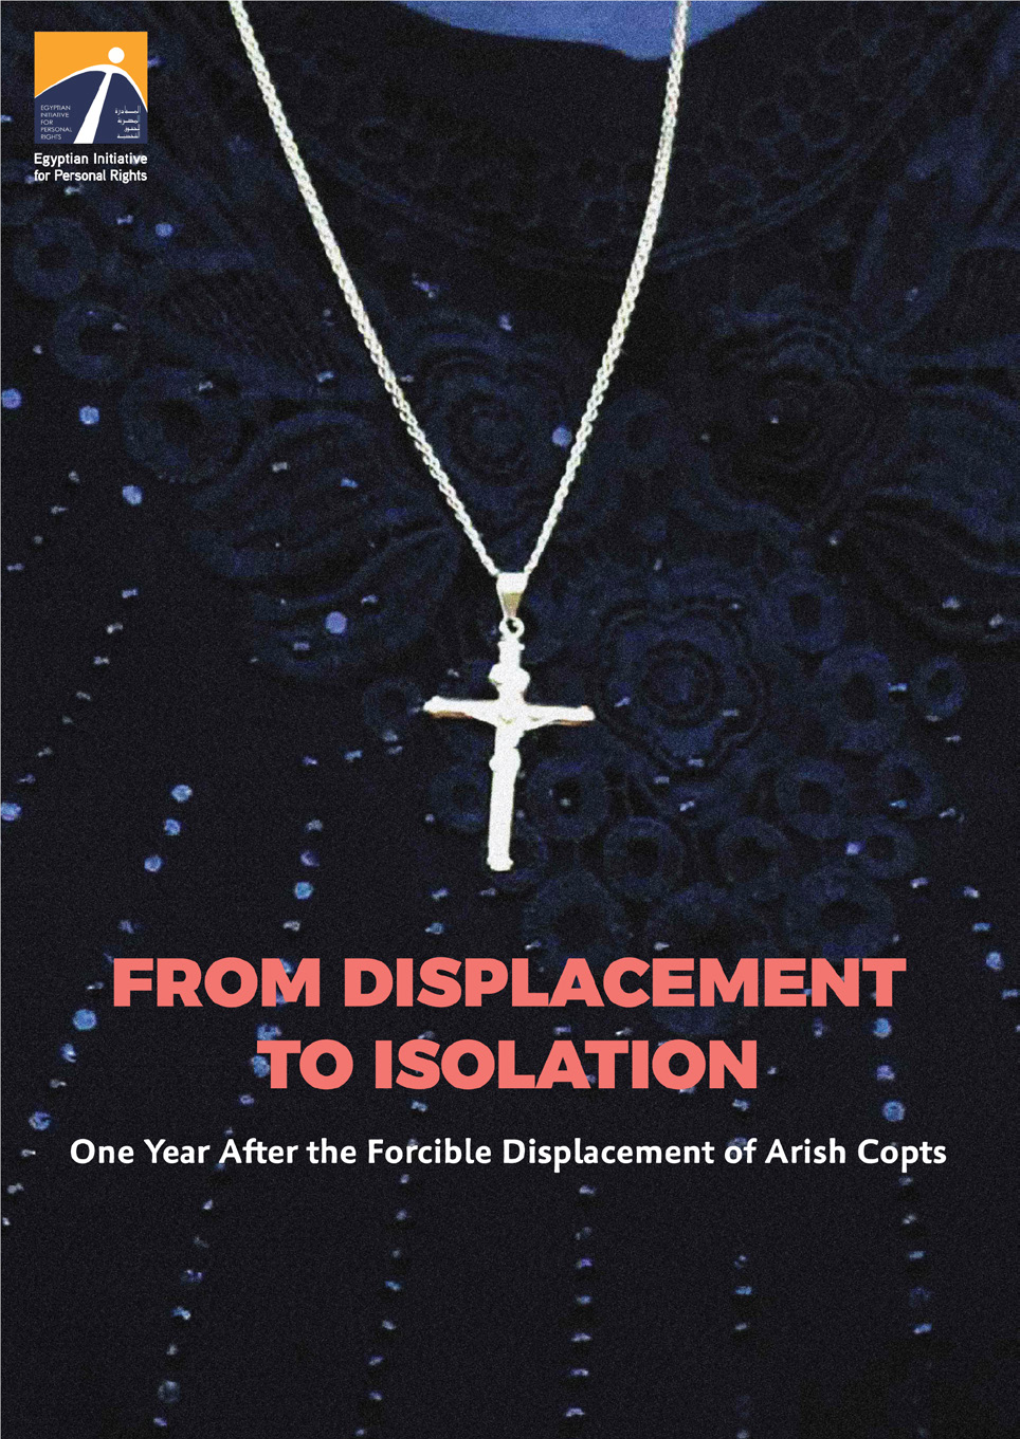 Download the Report "From Displacement to Isolation"